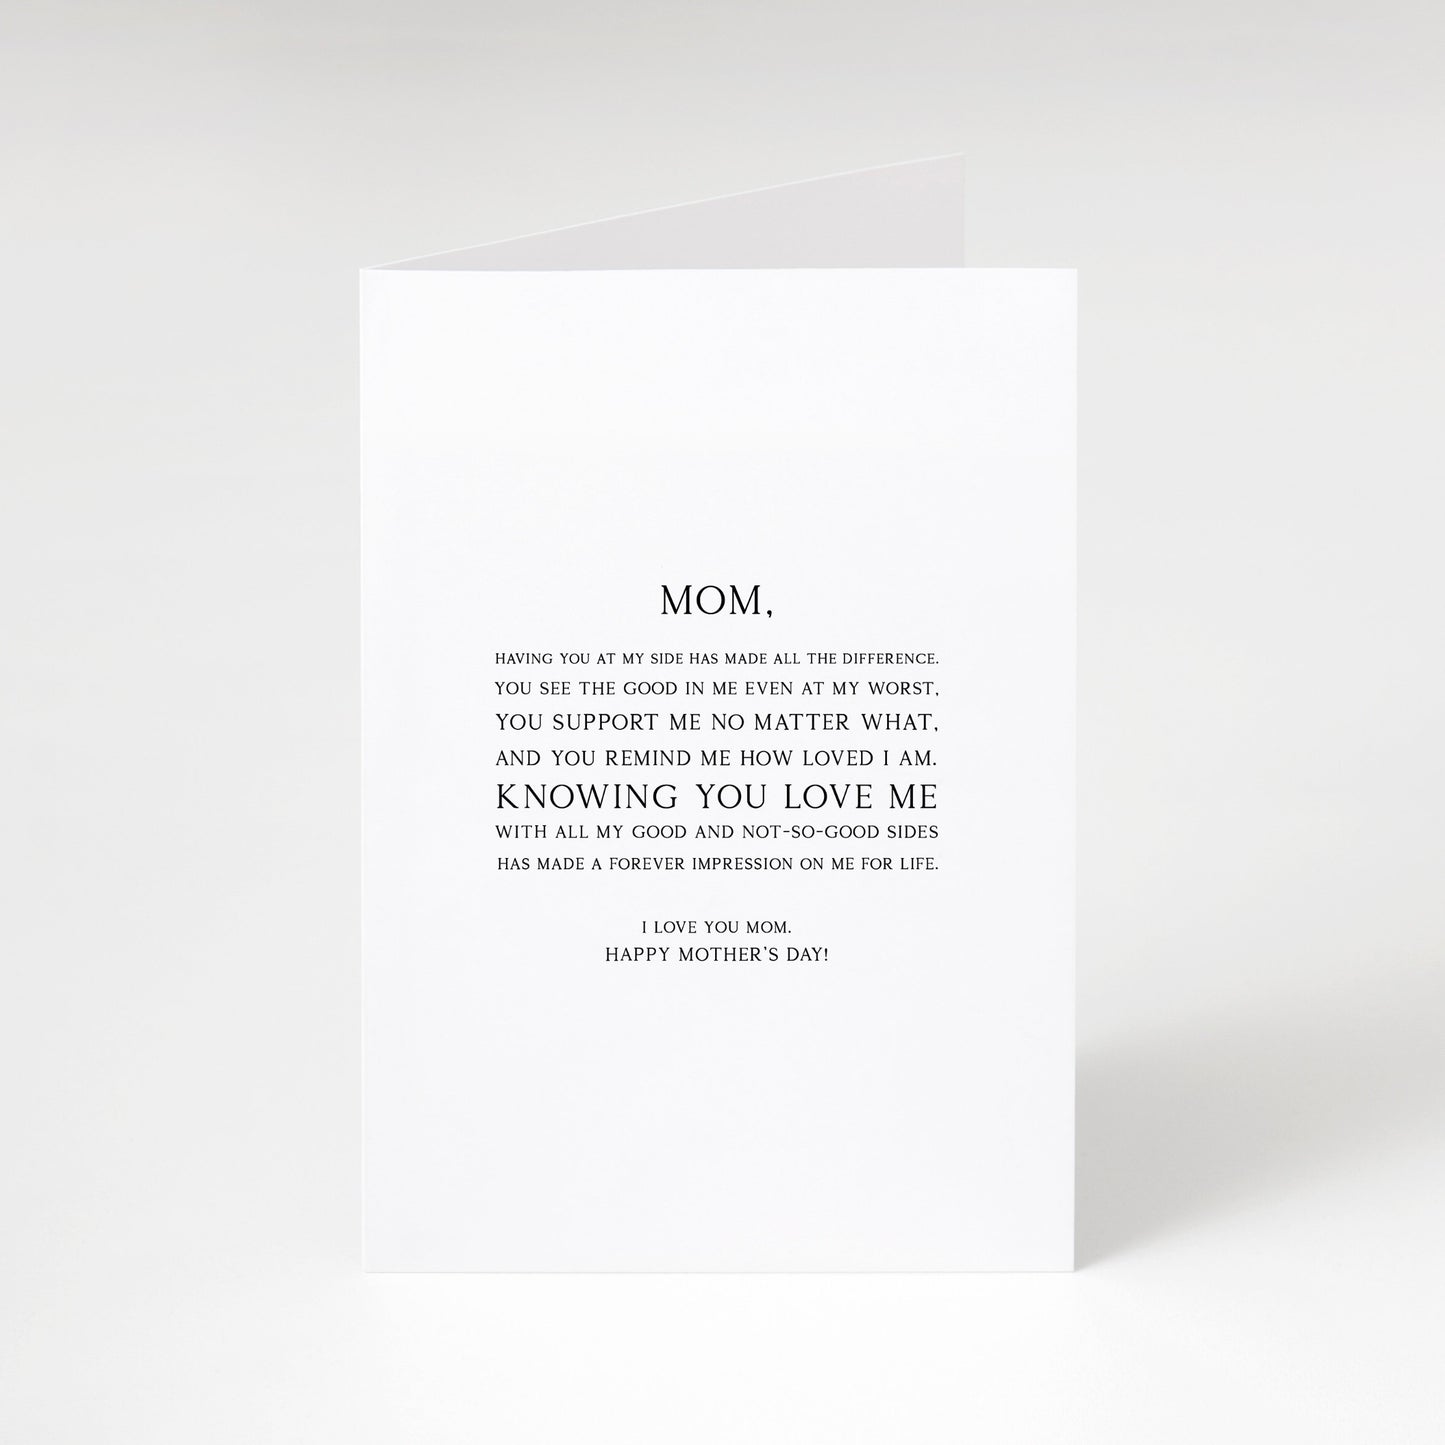 Mom having you at my side has made all the difference,Happy Mother’s Day card,To Mom,Mother’s Day card,Card for Mom,Card for Mother,From kid